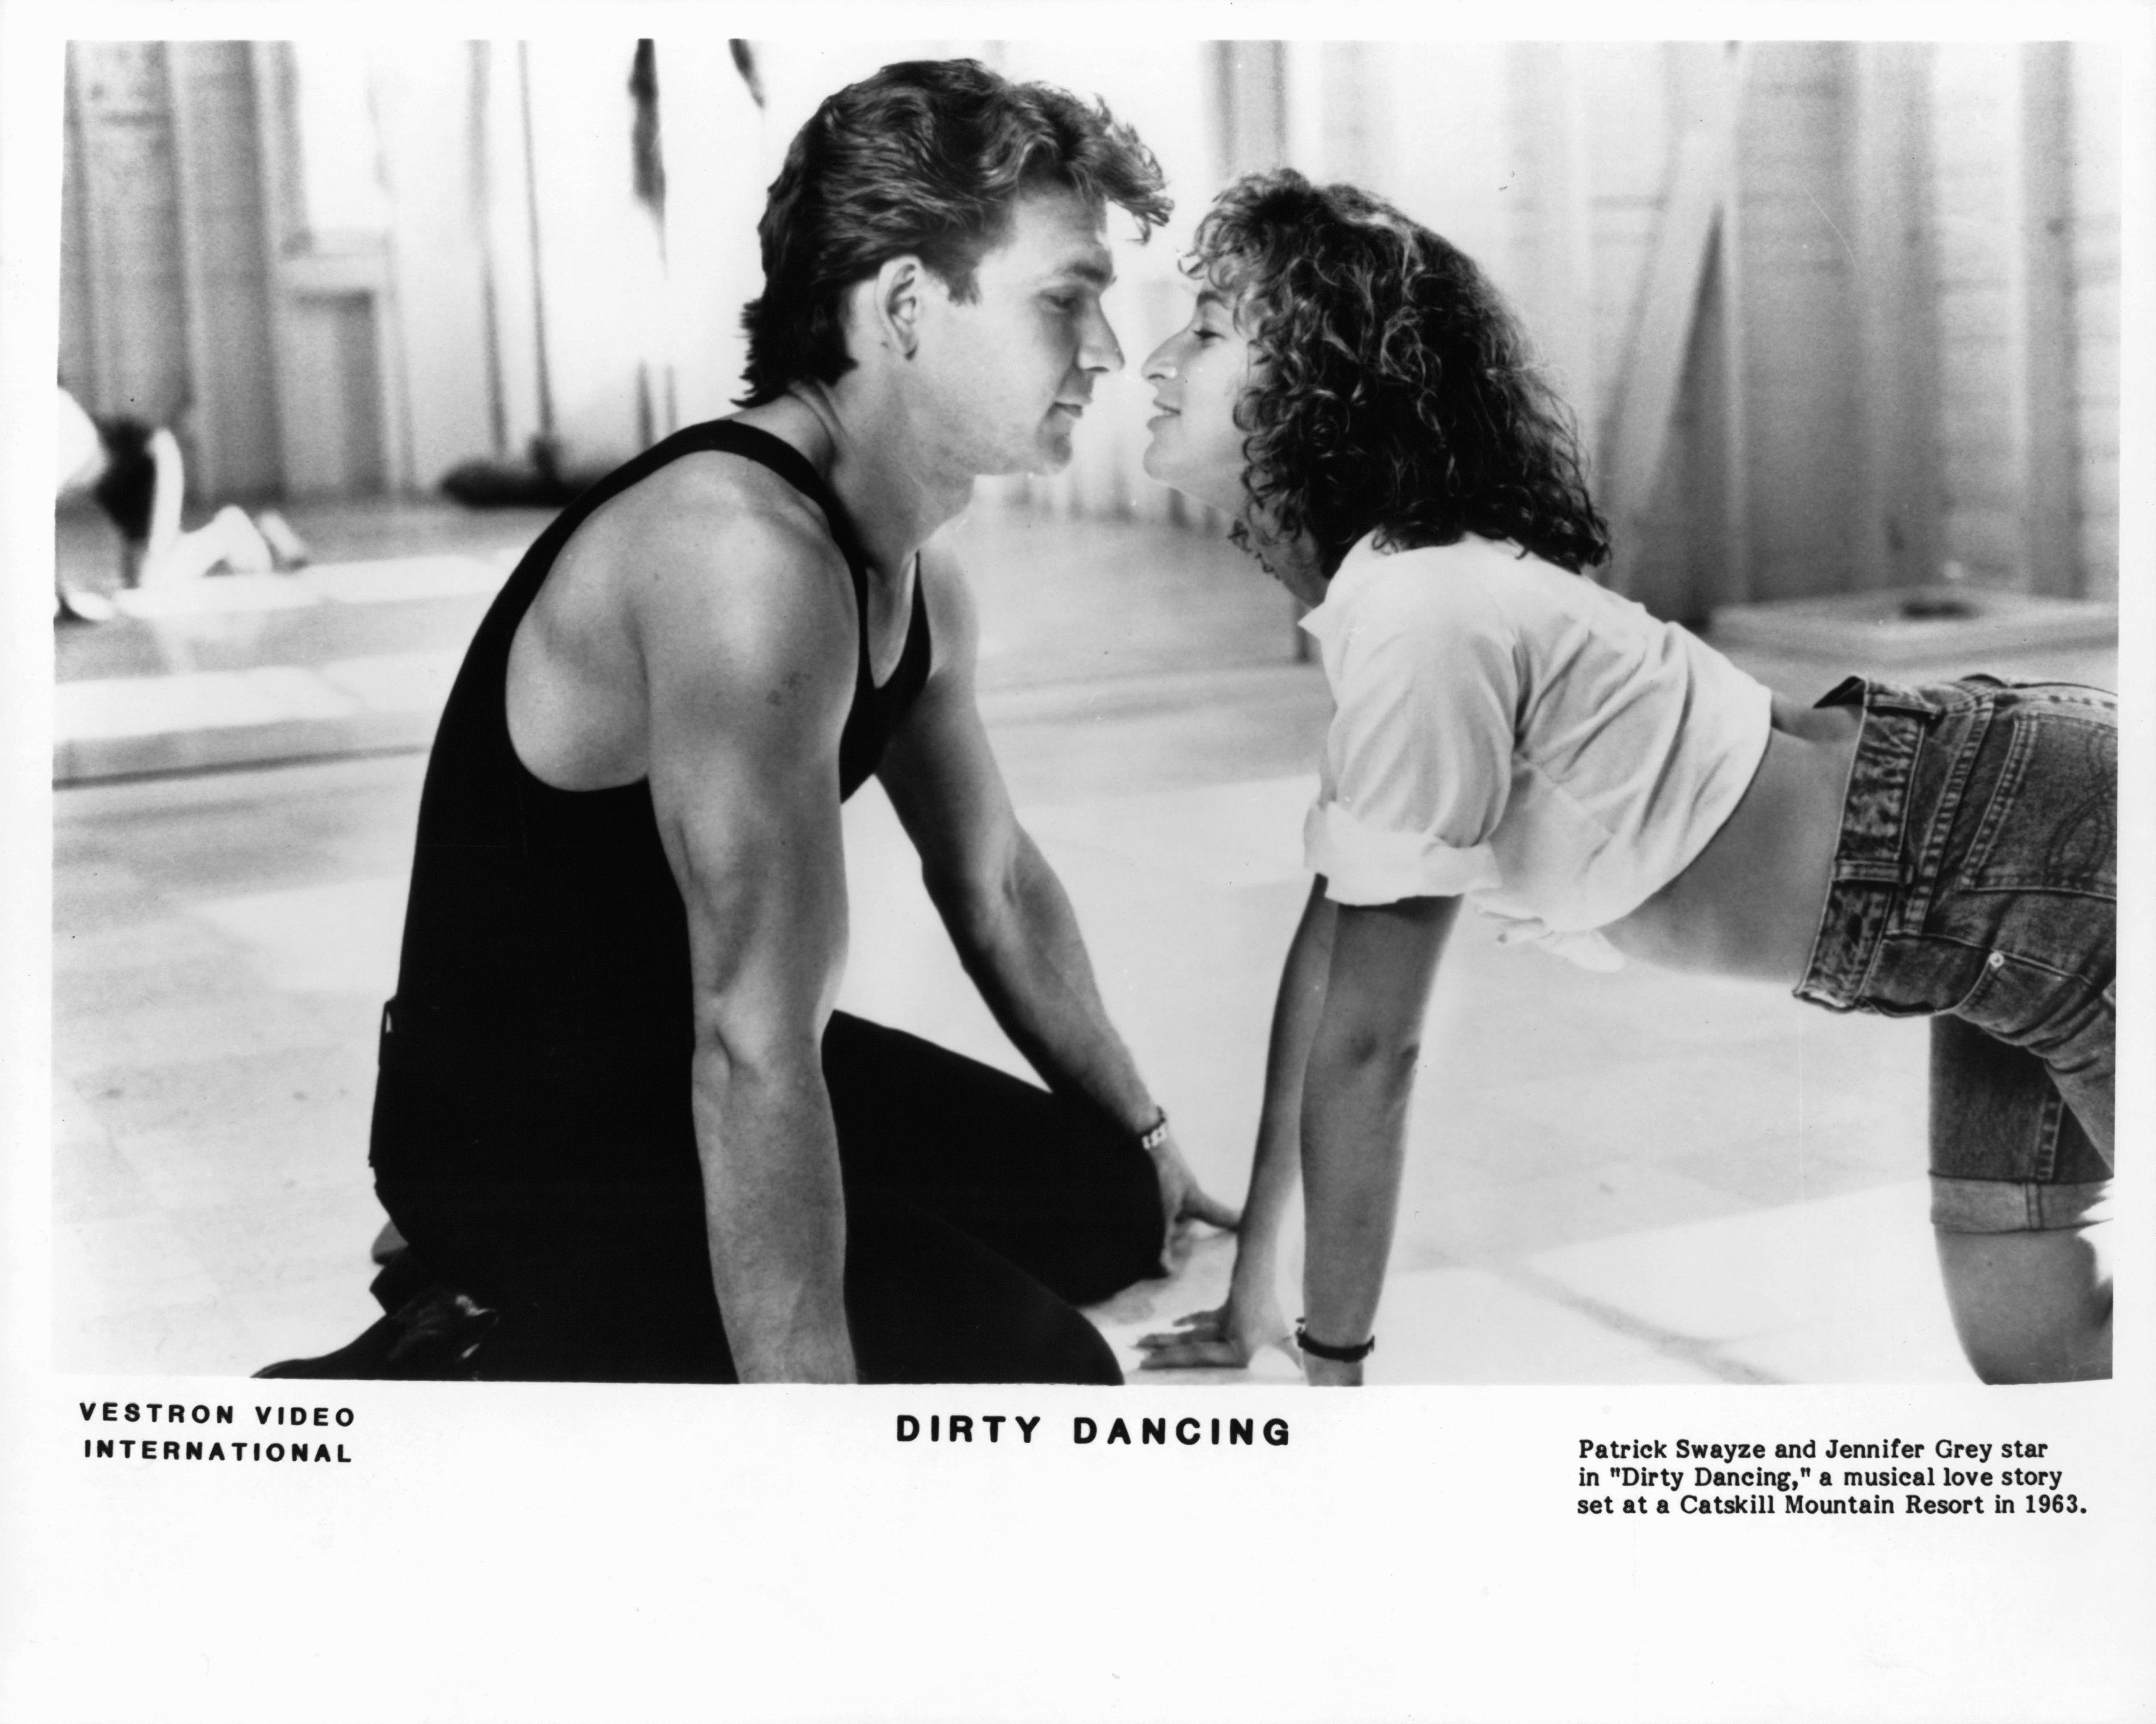 Patrick Swayze und Jennifer Grey in "Dirty Dancing", ca. 1987. | Quelle: Getty Images